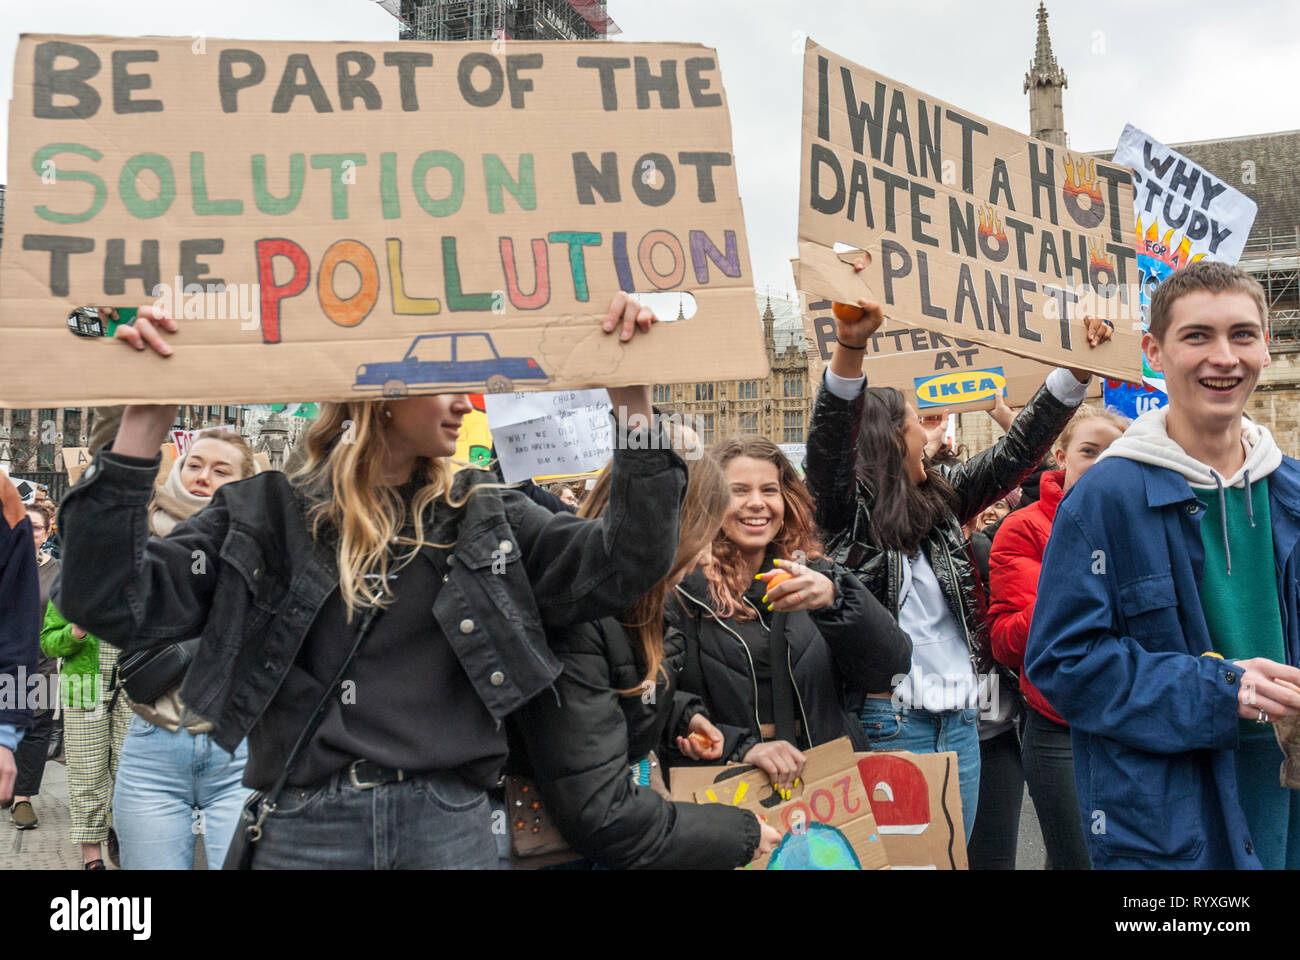 London, UK. 15th March, 2019. School students campaigning against climate change protest outside Parliament. Credit: Maggie sully/Alamy Live News. School children on strike to protest at climate change gathering outside Parliament, London. The students, boys and girls, smile and shout and carry colourful homemade banners 'Be part of the solution not the pollution', and 'I want a hot date not a hot planet'. Part of the worldwide 'FridaysforFuture' protest. Stock Photo